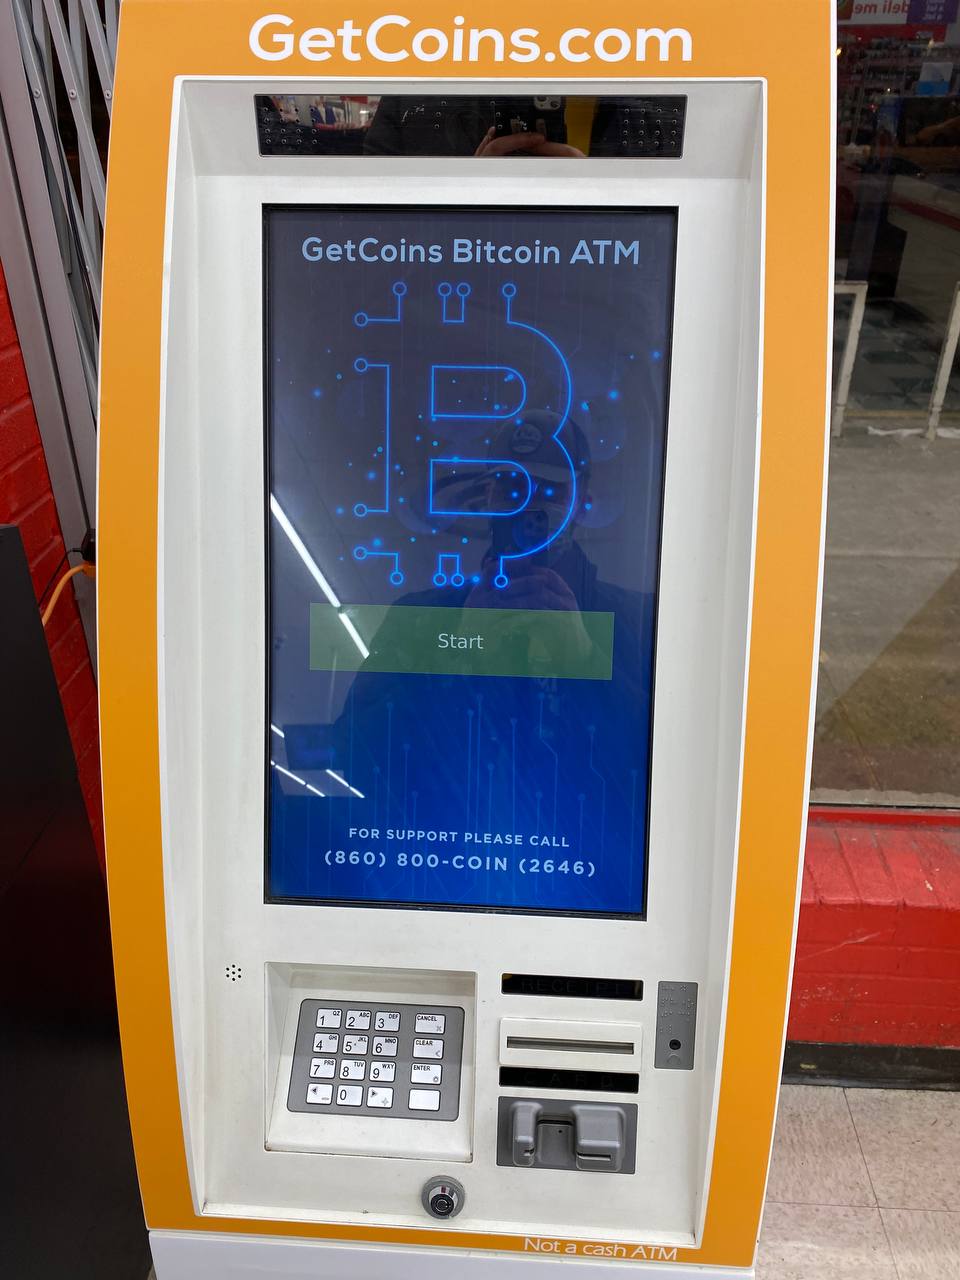 Getcoins - Bitcoin ATM - Inside of Save A Lot in Baltimore, Maryland